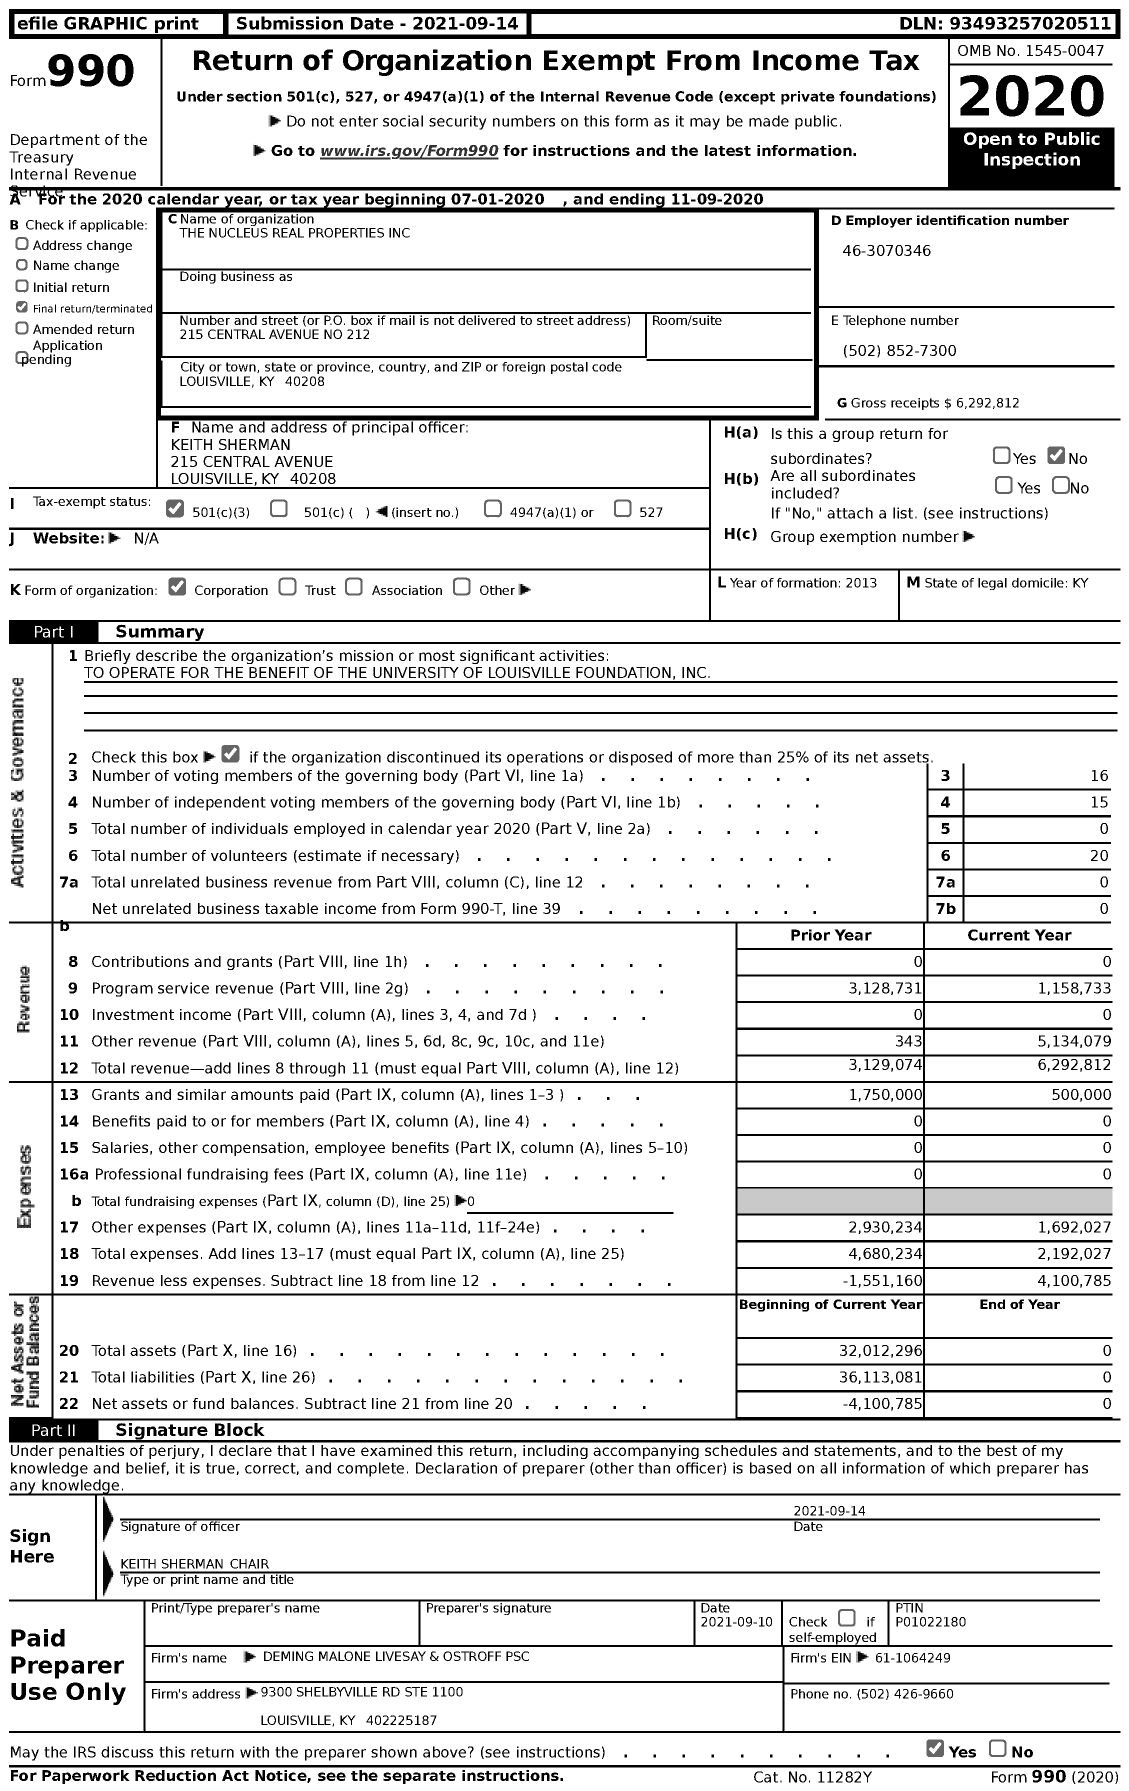 Image of first page of 2019 Form 990 for The Nucleus Real Properties